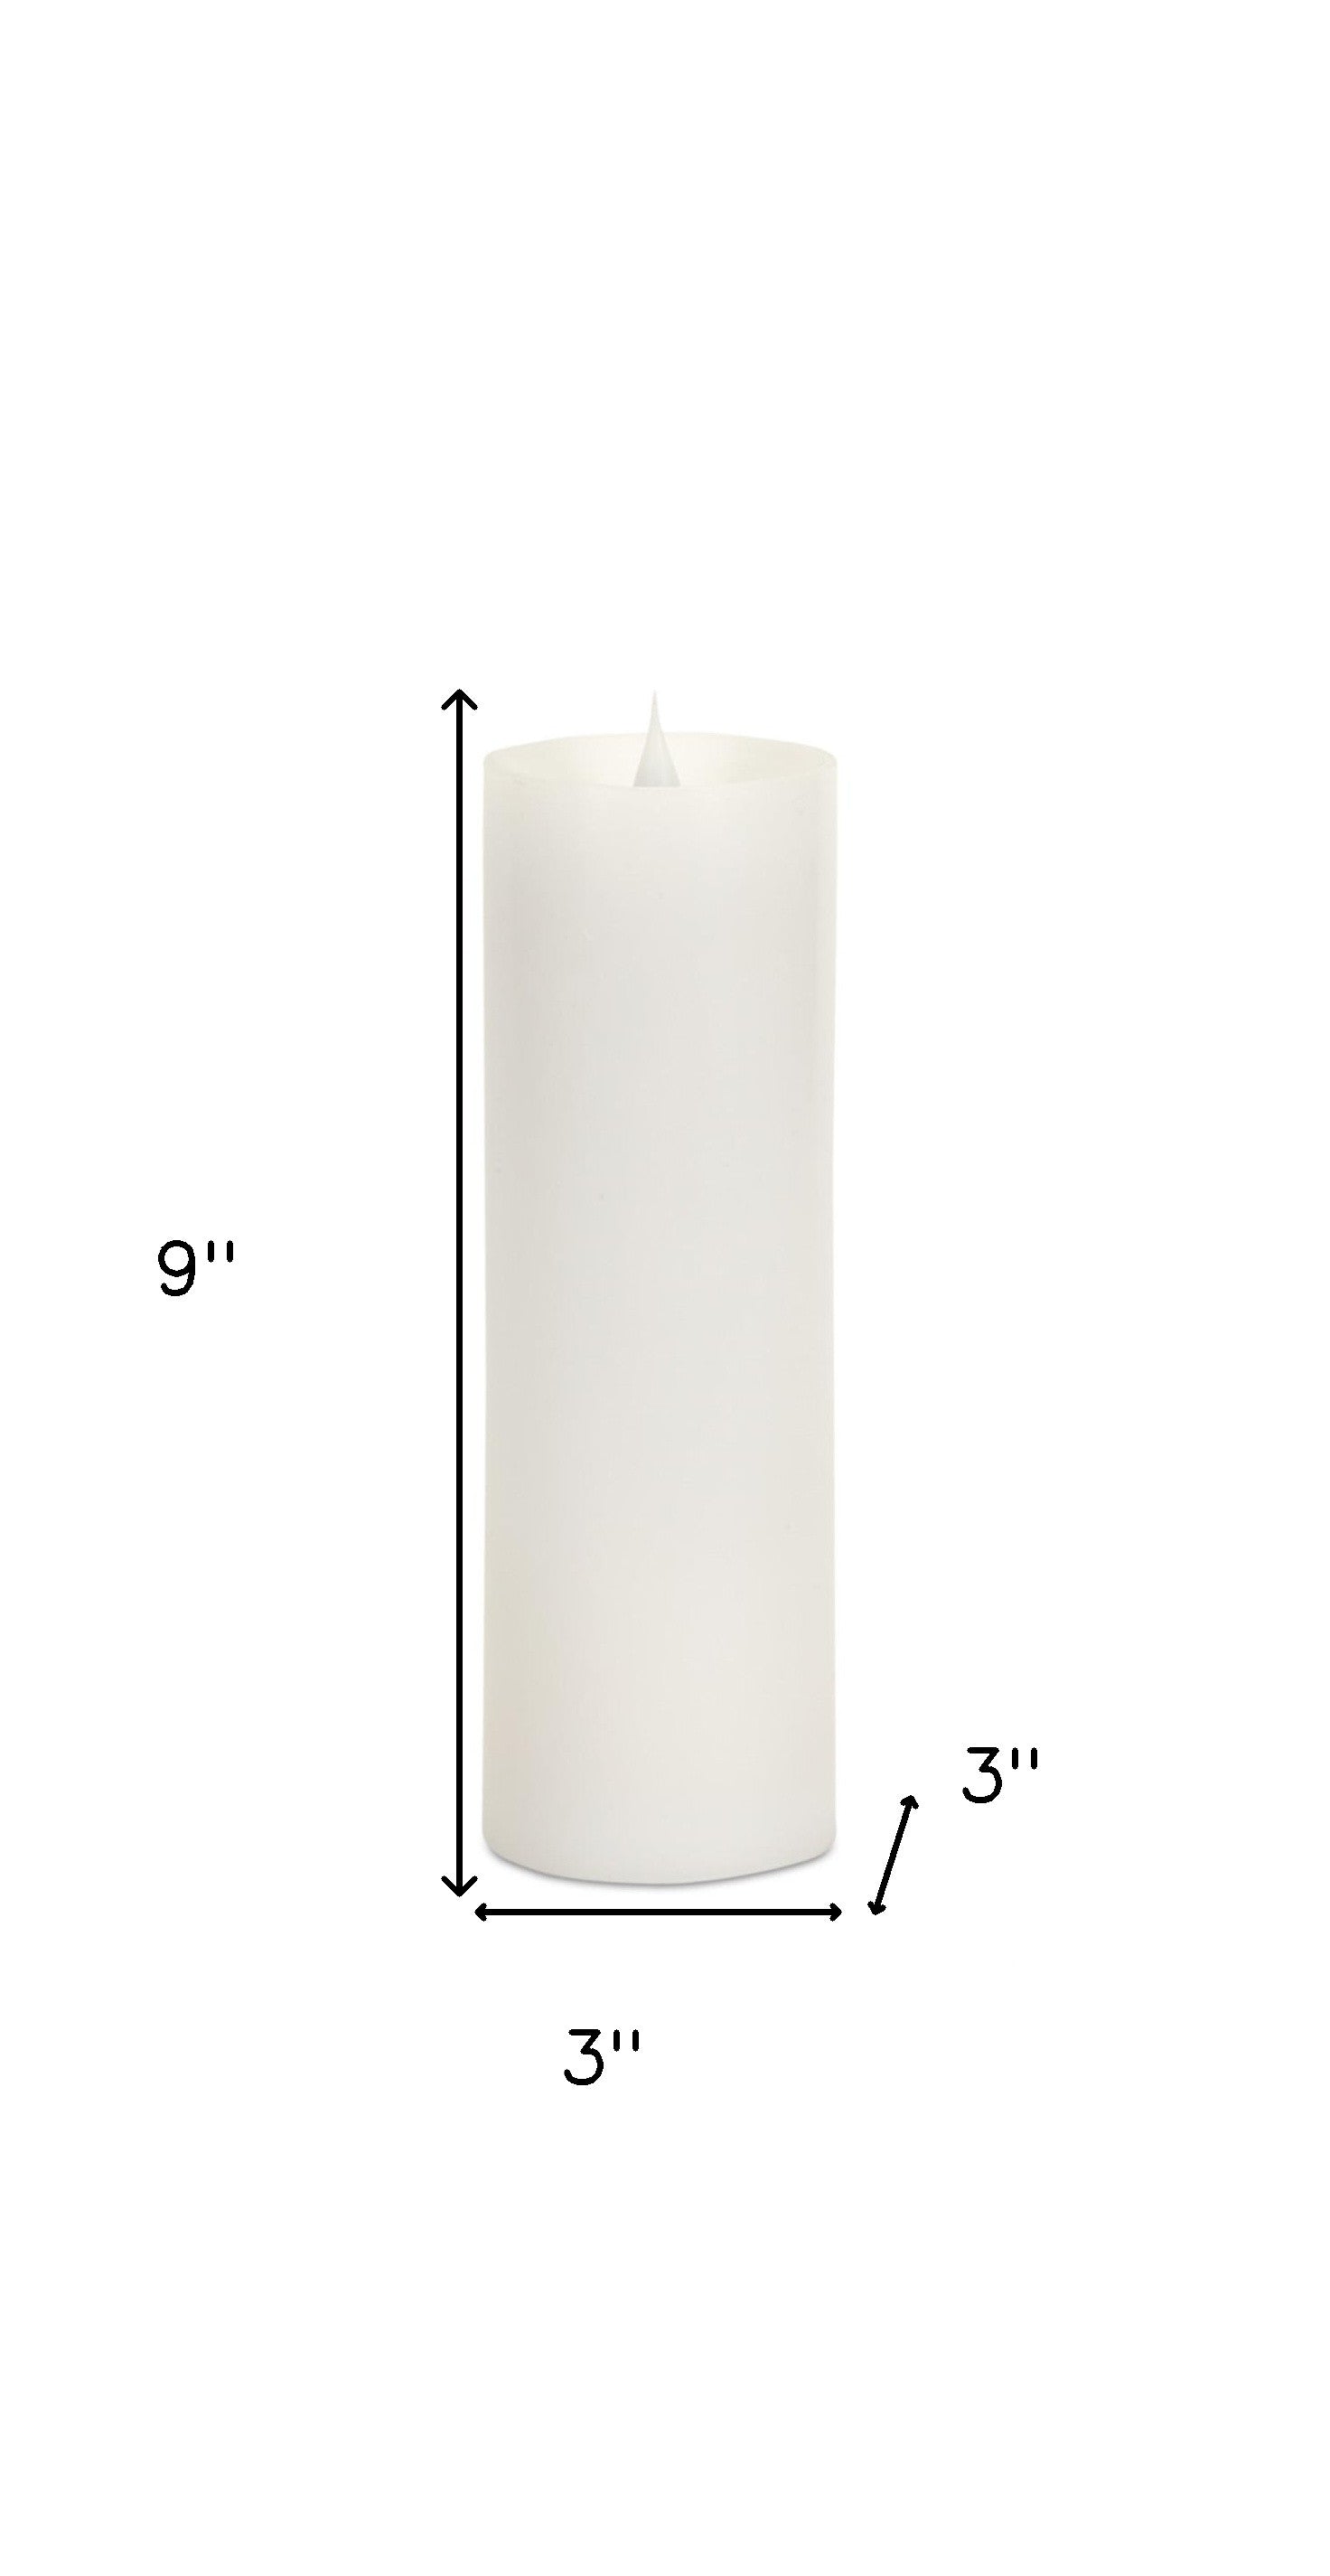 Set of Two White Flameless Pillar Candles